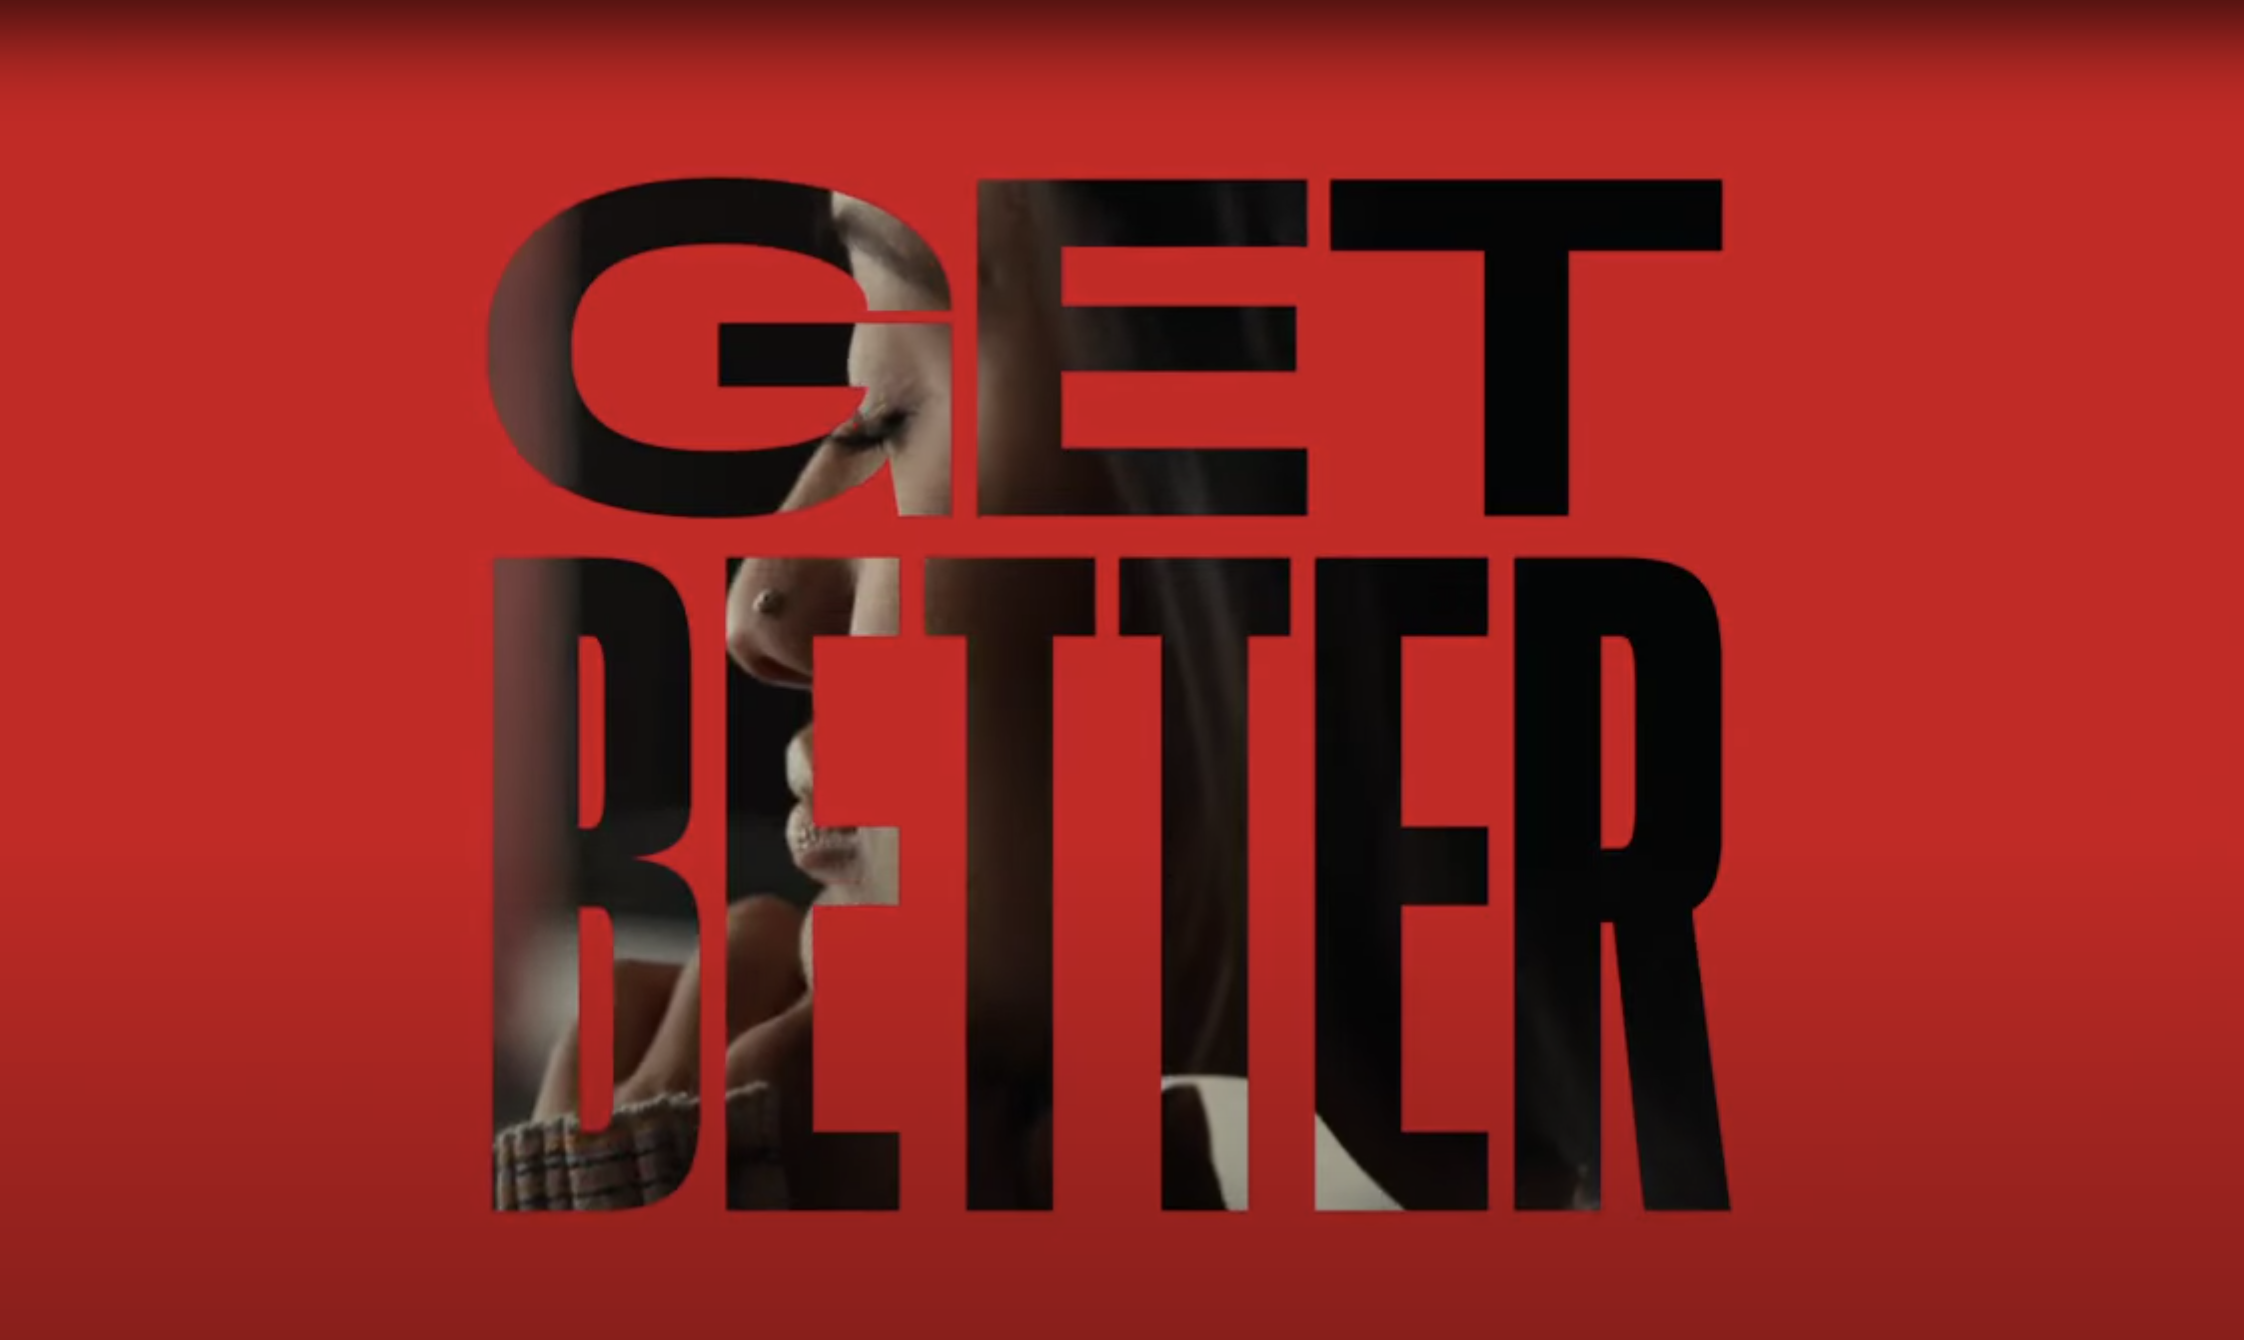 A shot from Eli Lillys Get Better campaign showing the tagline on a red background